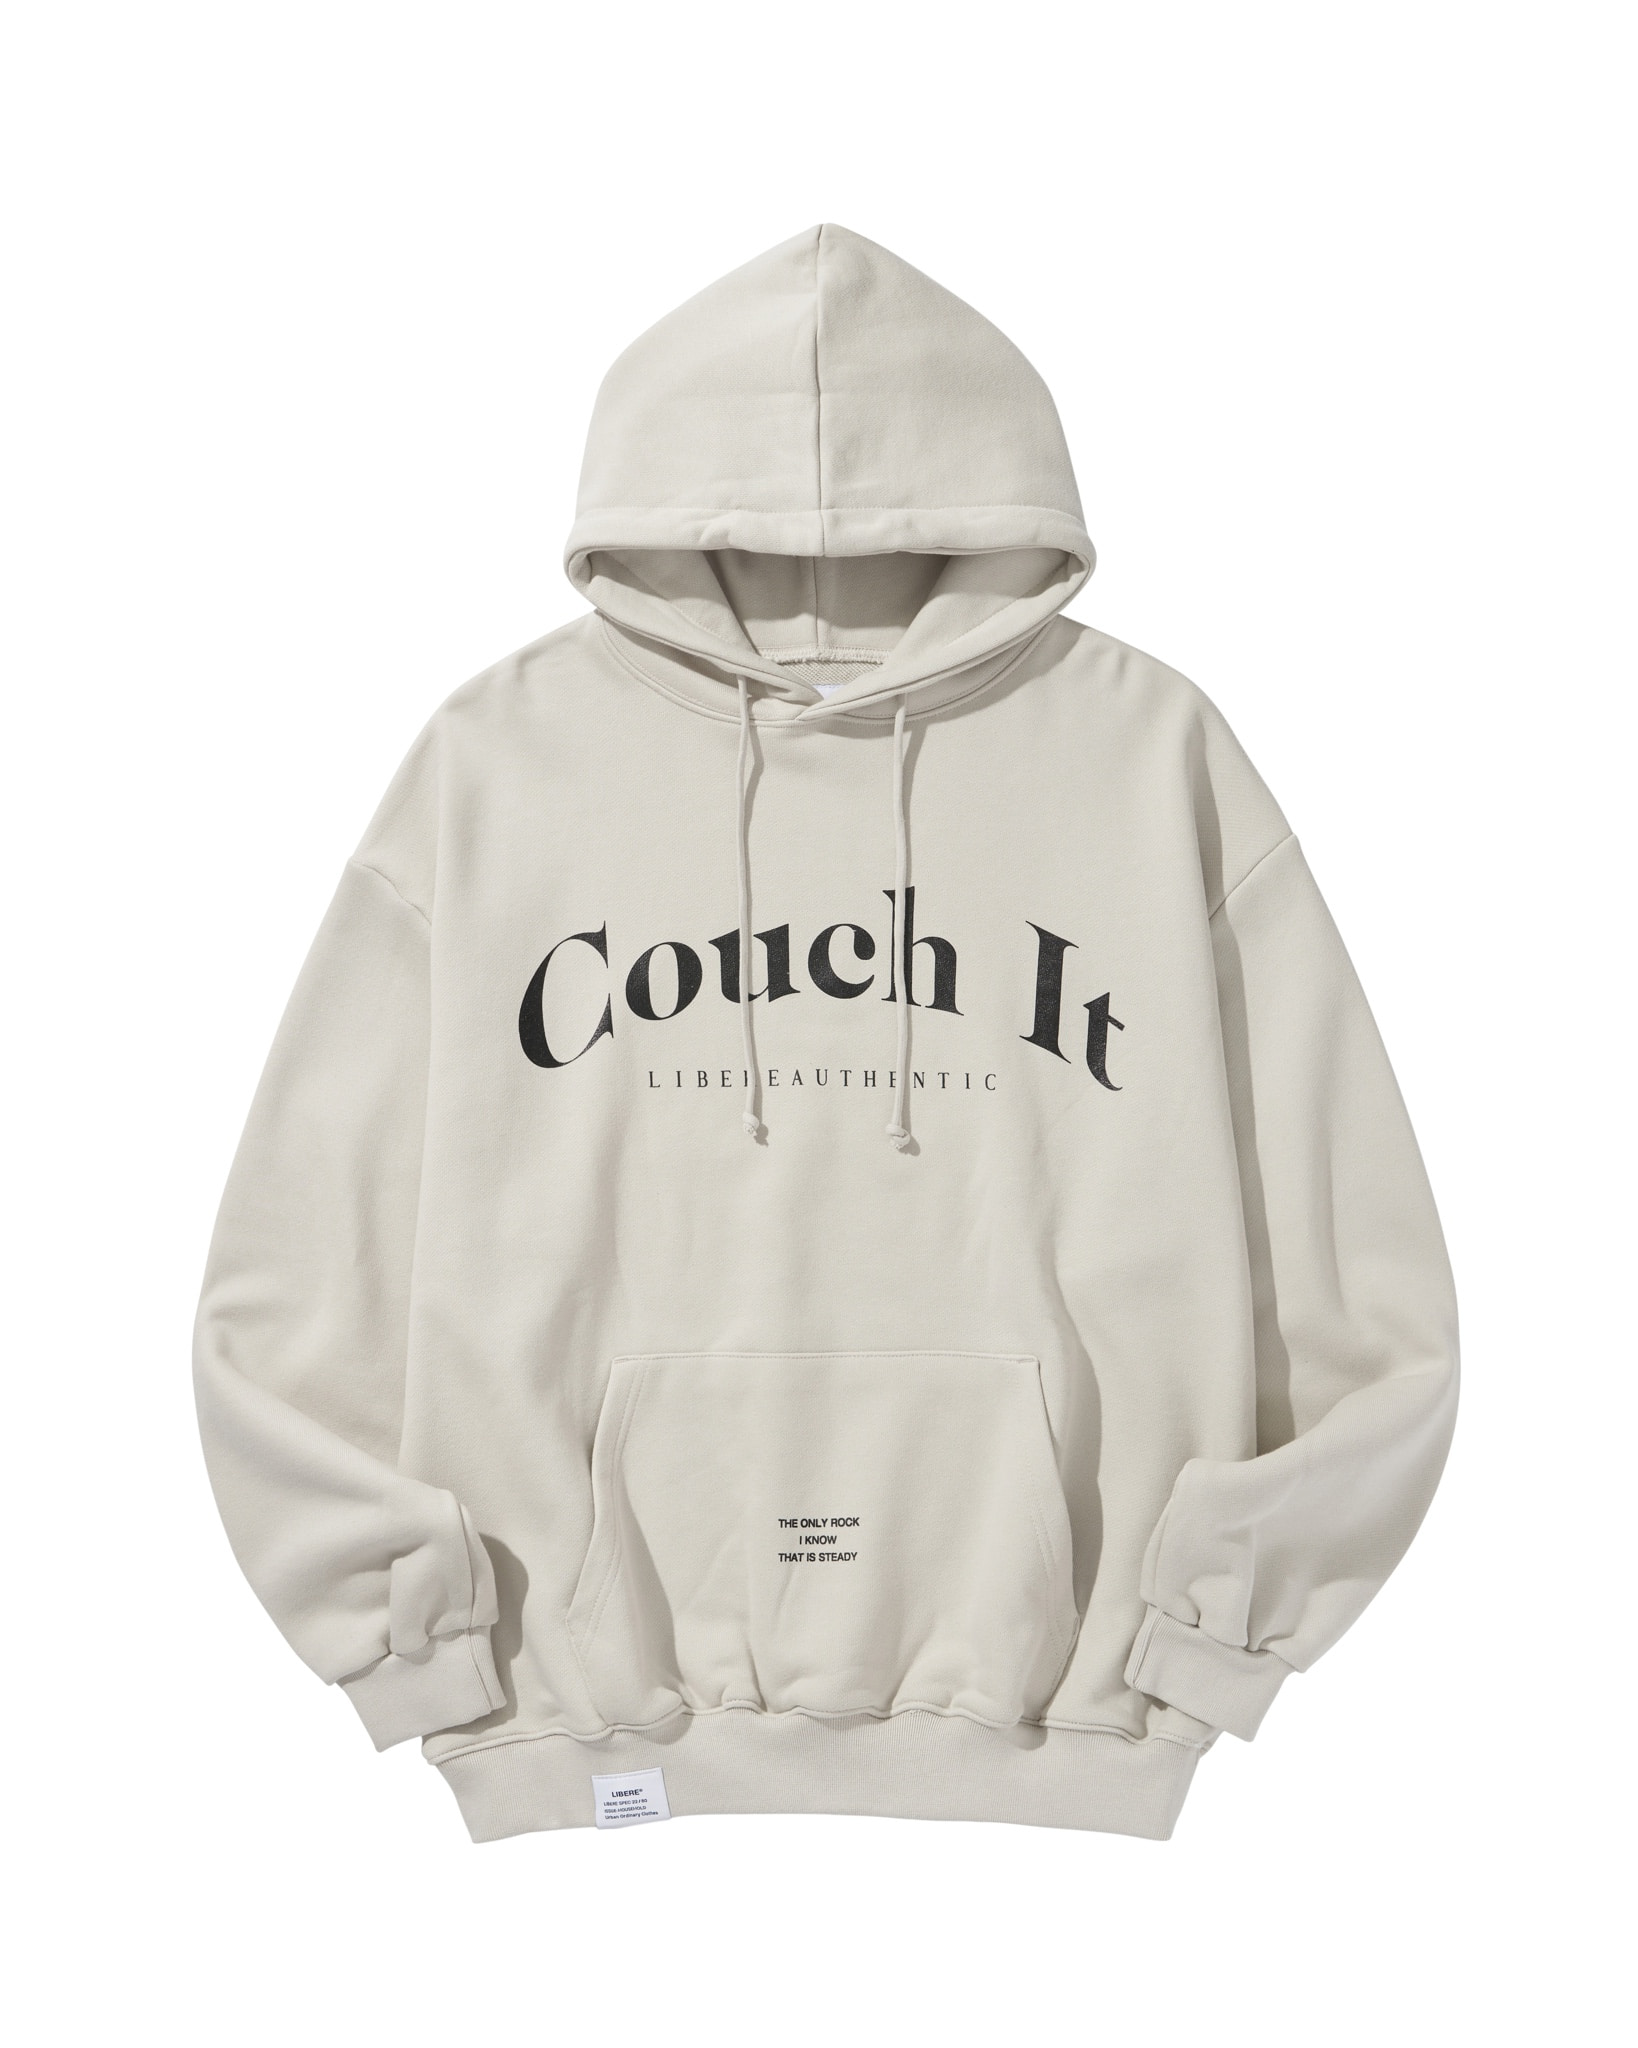 COUCH 2 HOODIE / LIGHT GRAY,BTS,JAPAN,FASHIONBRAND,LIBERE